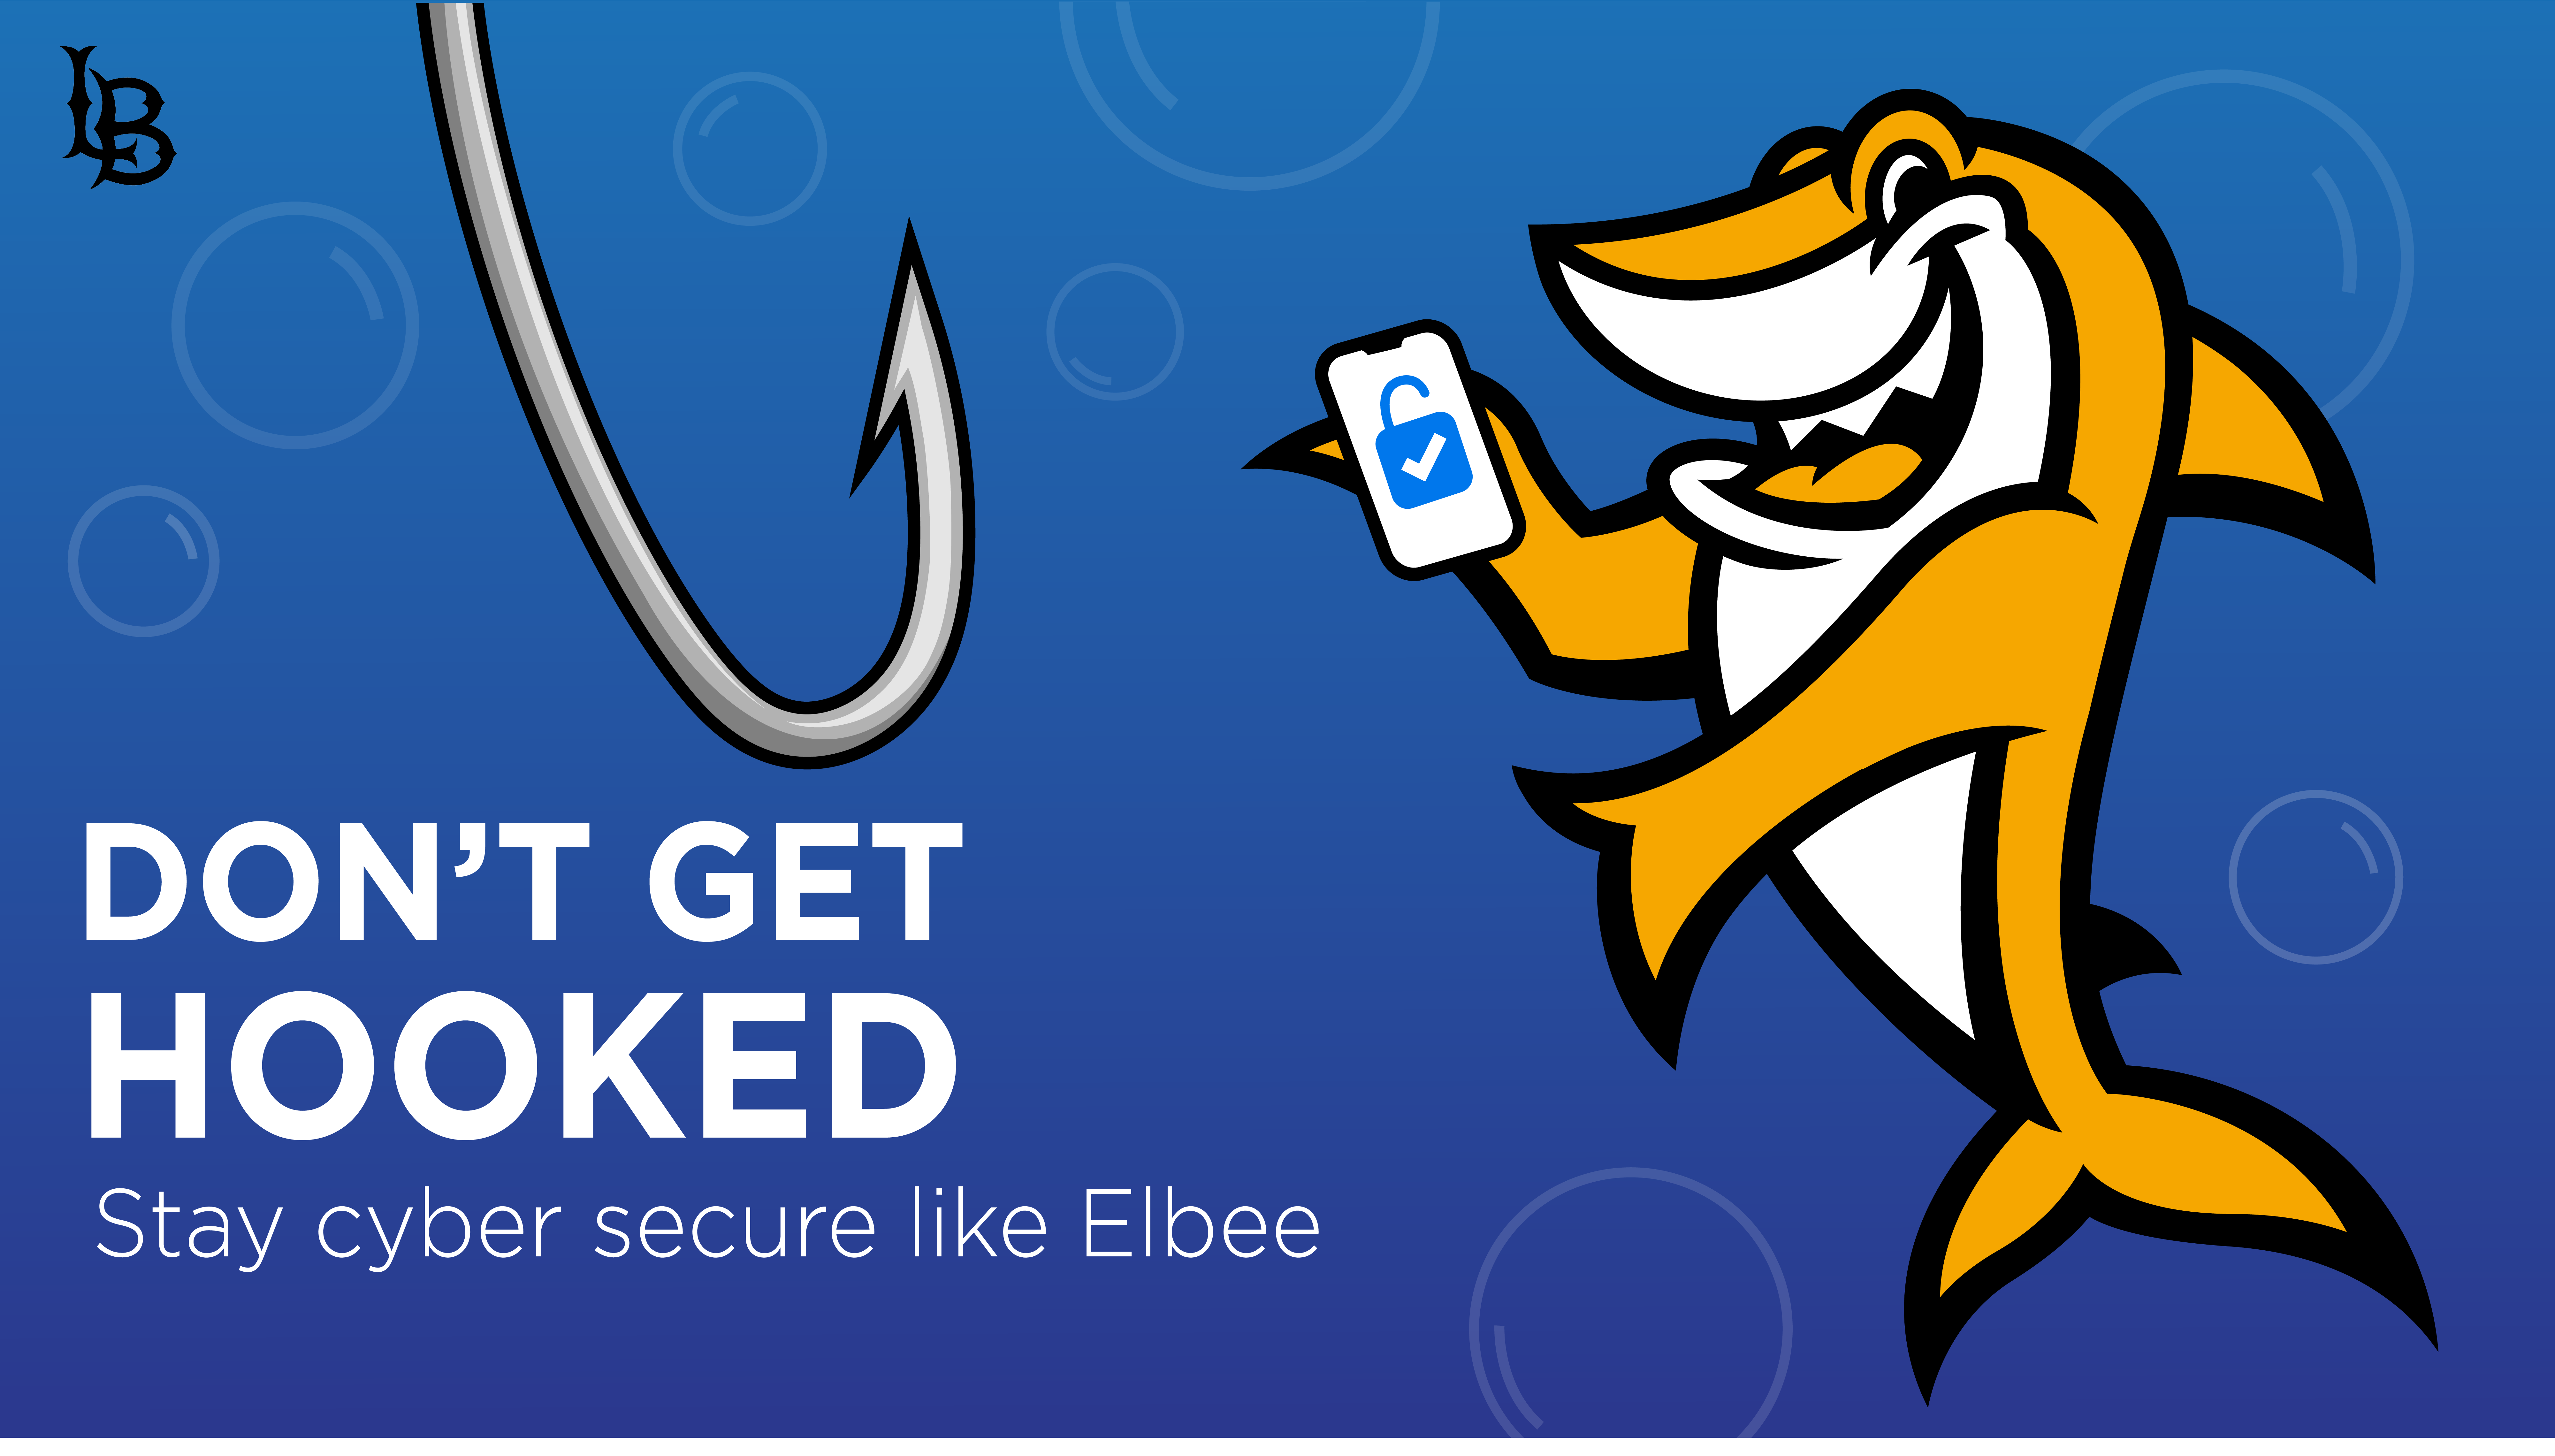 Elbee shark holding a mobile device. image says "don't get hooked. stay cyber secure like Elbee."